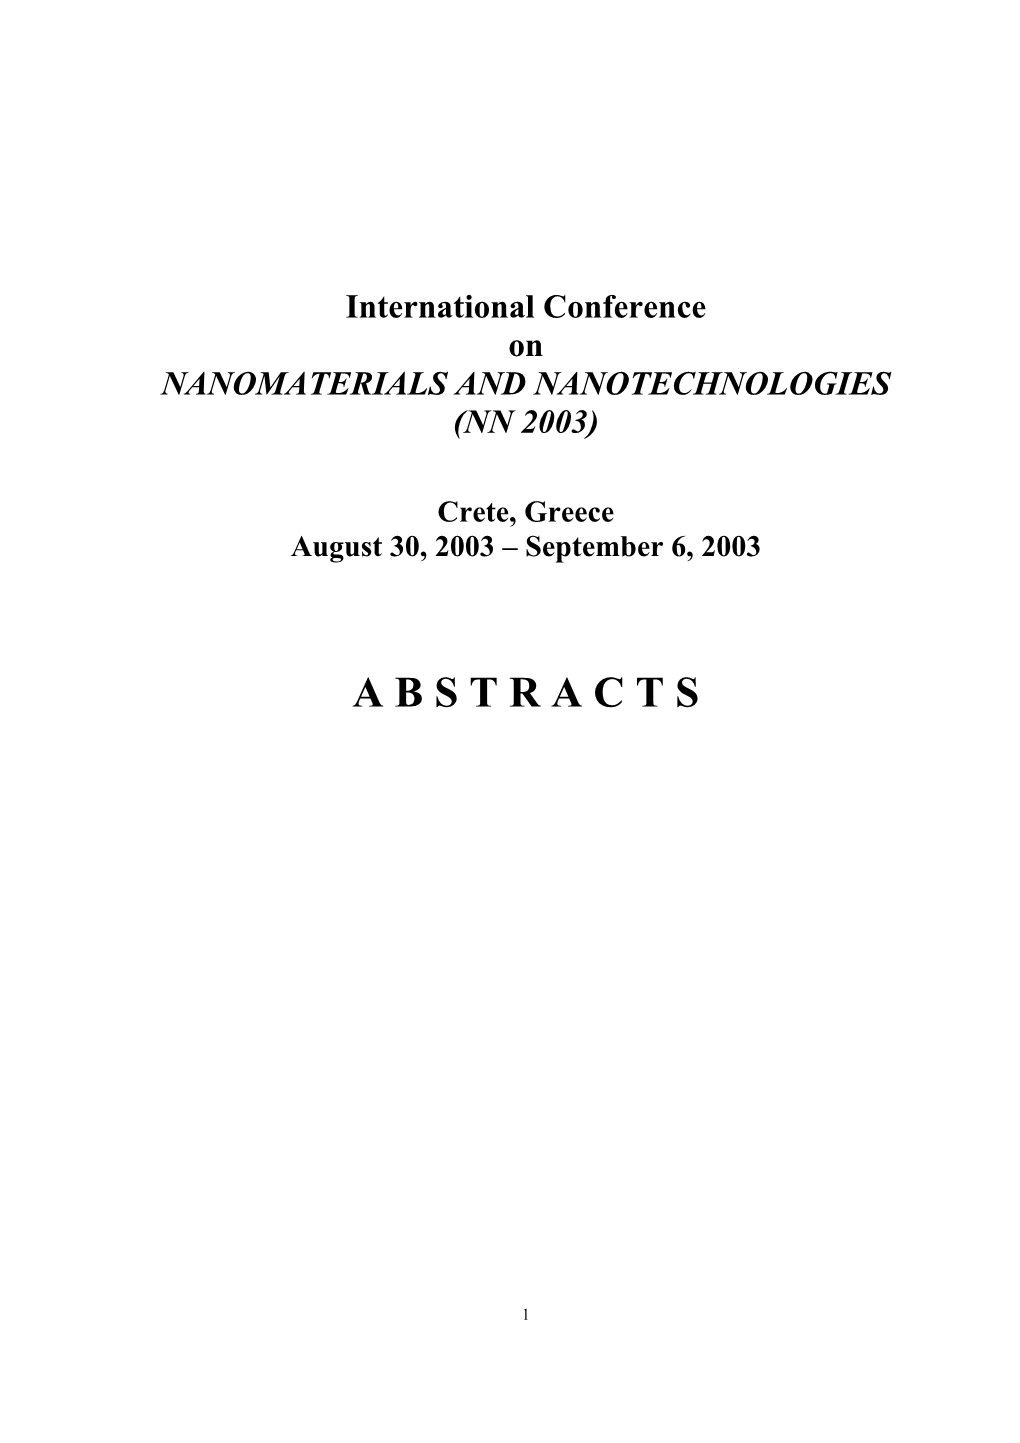 NN2003 Abstracts Print Version